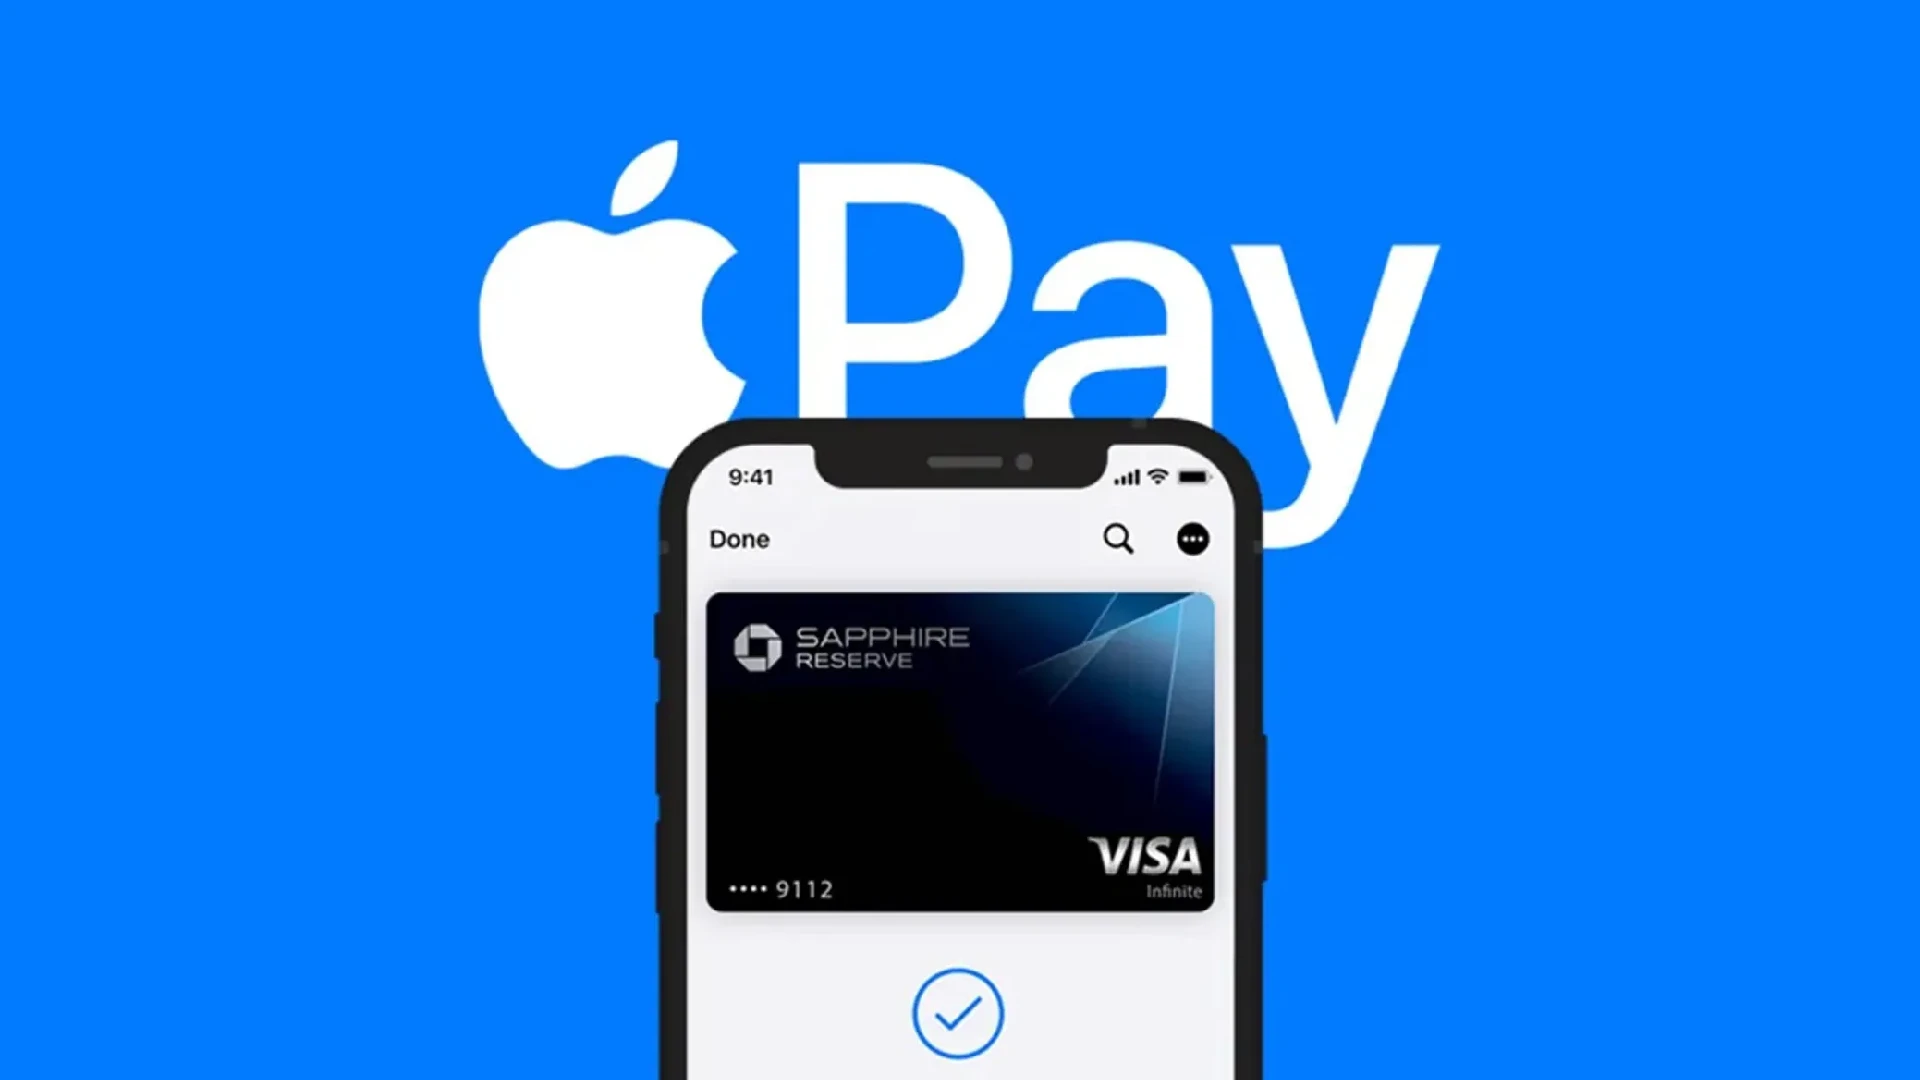 You’ll soon be able to use Apple Pay Later – but should you?